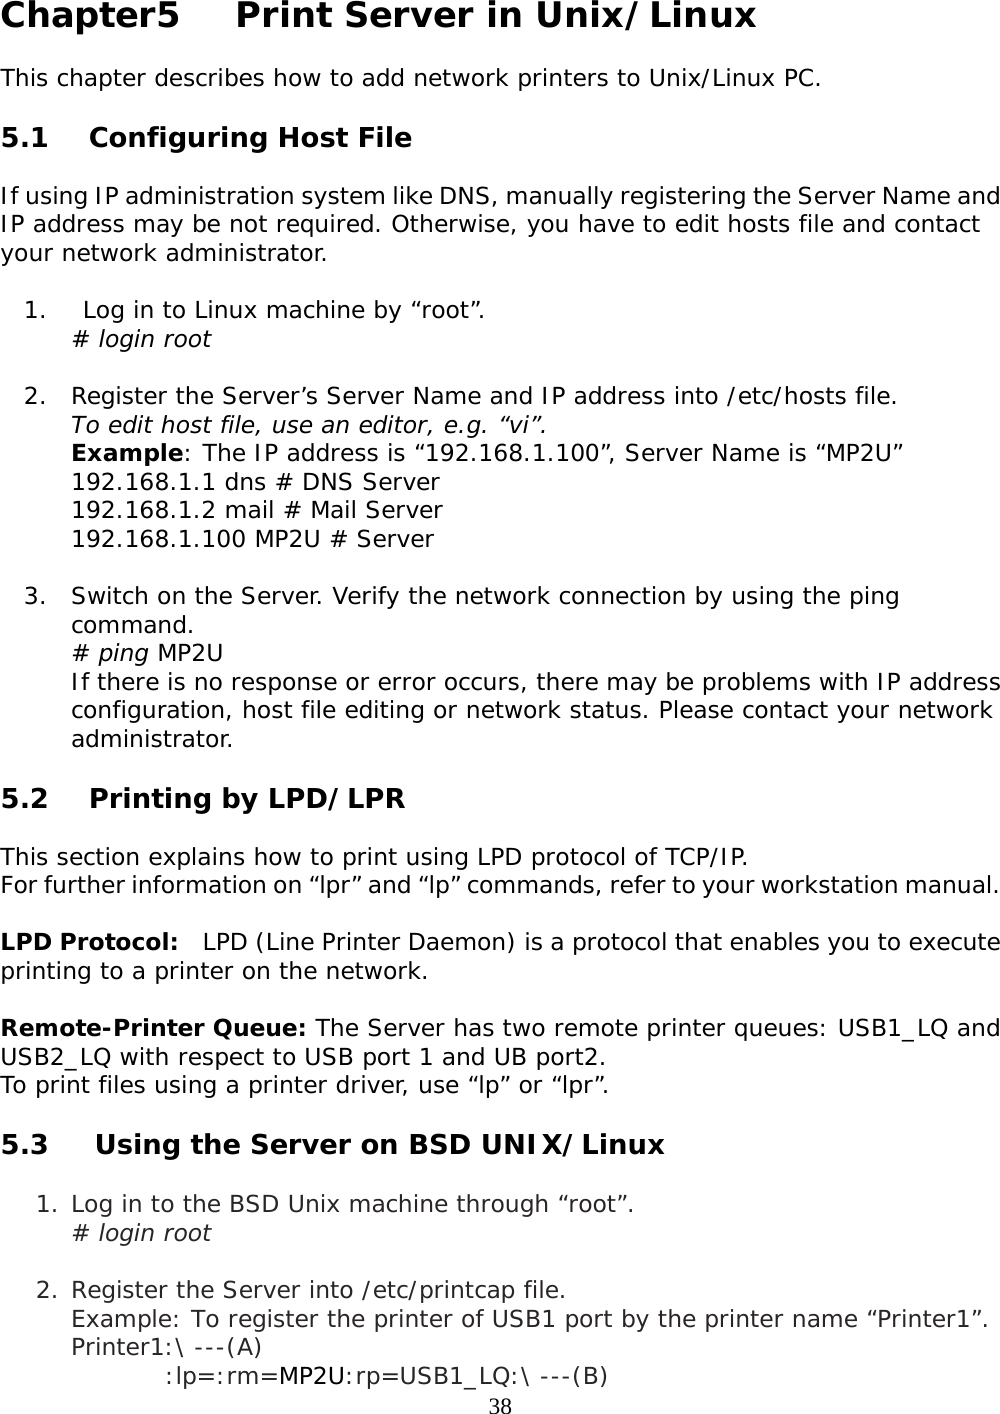     38 Chapter5    Print Server in Unix/Linux  This chapter describes how to add network printers to Unix/Linux PC.  5.1 Configuring Host File   If using IP administration system like DNS, manually registering the Server Name and IP address may be not required. Otherwise, you have to edit hosts file and contact your network administrator.  1.  Log in to Linux machine by “root”.  # login root   2. Register the Server’s Server Name and IP address into /etc/hosts file.  To edit host file, use an editor, e.g. “vi”.  Example: The IP address is “192.168.1.100”, Server Name is “MP2U”  192.168.1.1 dns # DNS Server 192.168.1.2 mail # Mail Server  192.168.1.100 MP2U # Server  3. Switch on the Server. Verify the network connection by using the ping command.  # ping MP2U If there is no response or error occurs, there may be problems with IP address configuration, host file editing or network status. Please contact your network administrator.   5.2 Printing by LPD/LPR  This section explains how to print using LPD protocol of TCP/IP.  For further information on “lpr” and “lp” commands, refer to your workstation manual.   LPD Protocol:  LPD (Line Printer Daemon) is a protocol that enables you to execute printing to a printer on the network.   Remote-Printer Queue: The Server has two remote printer queues: USB1_LQ and USB2_LQ with respect to USB port 1 and UB port2.  To print files using a printer driver, use “lp” or “lpr”.  5.3  Using the Server on BSD UNIX/Linux  1. Log in to the BSD Unix machine through “root”. # login root  2. Register the Server into /etc/printcap file. Example: To register the printer of USB1 port by the printer name “Printer1”. Printer1:\ ---(A) :lp=:rm=MP2U:rp=USB1_LQ:\ ---(B) 